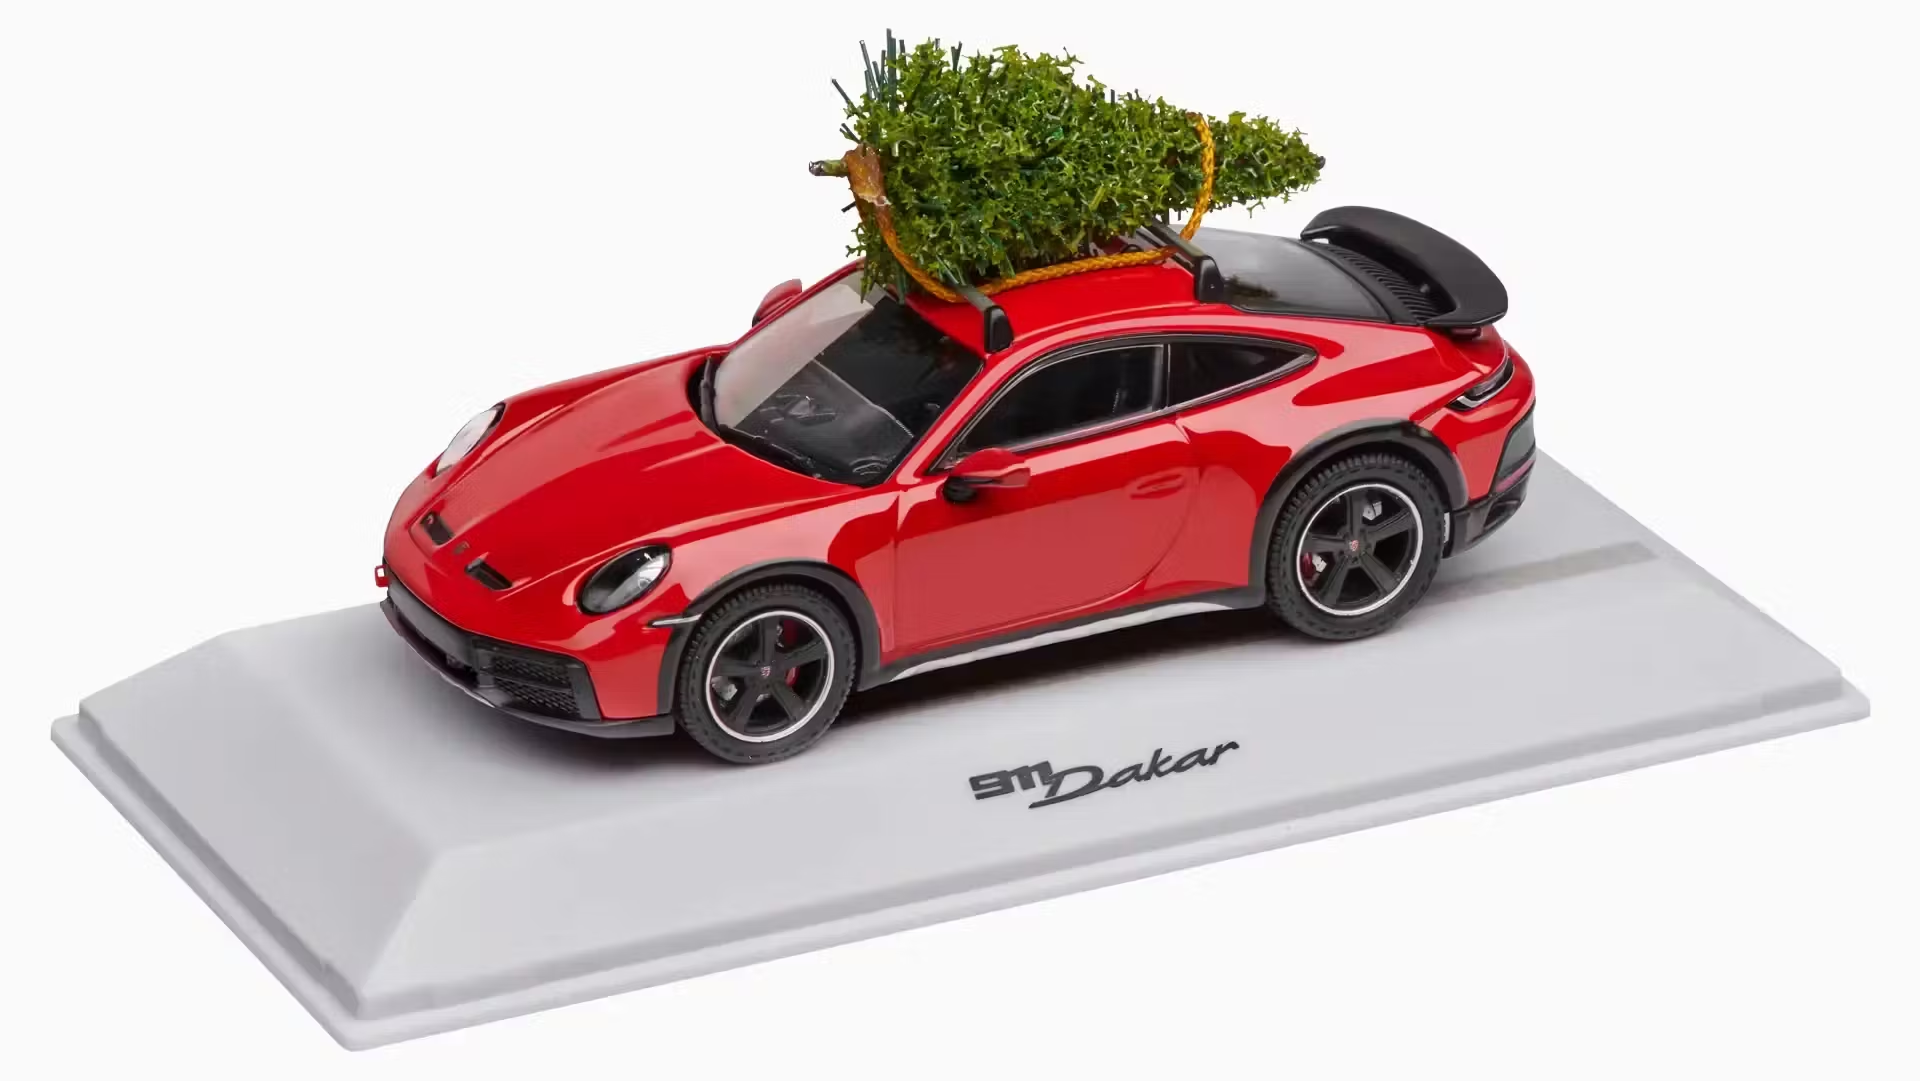 Here are Perfect Gag Gifts For The Car Obsessed